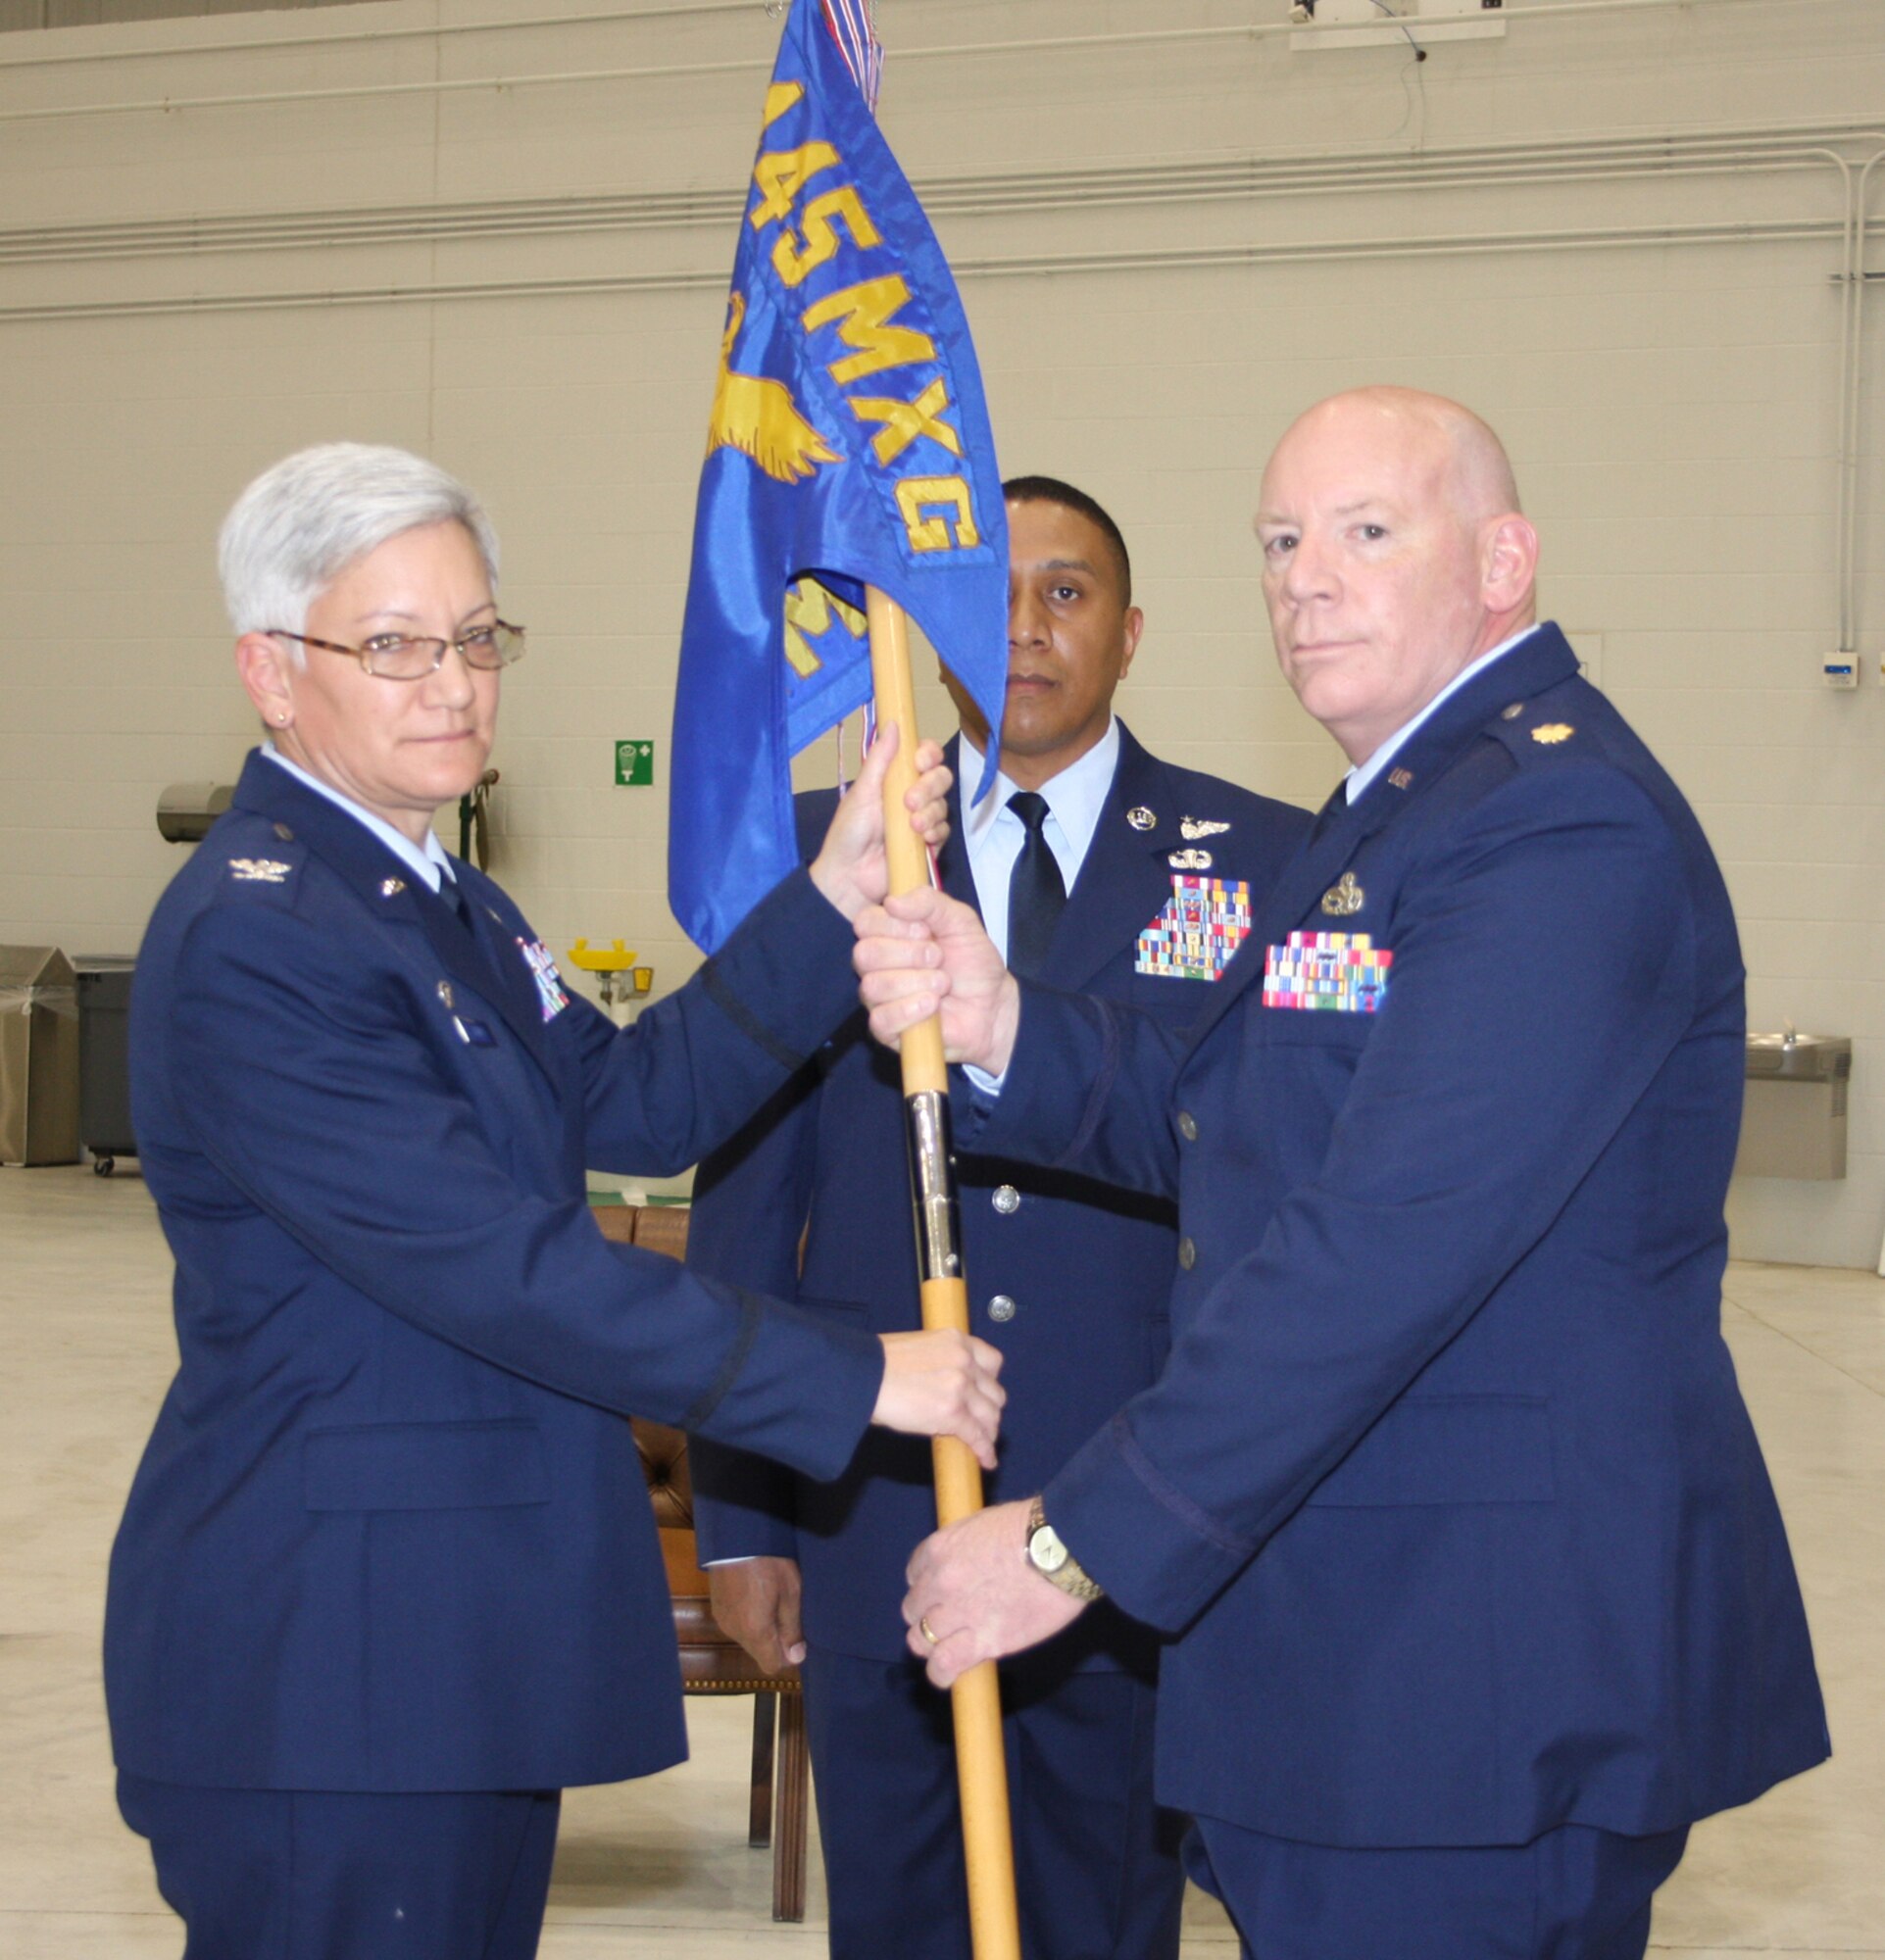 WRIGHT-PATTERSON AFB, Ohio – Col. Anna Schulte, 445th Maintenance Group commander, passes the guidon to Maj. George Palmer, incoming Aircraft Maintenance Squadron commander, during the May 3 Assumption of Command ceremony. Senior Master Sgt. James Felton, Jr., AMXS first sergeant, looks on.  Maj. Palmer was the aircraft maintenance commander for the 459th Air Refueling Wing at Andrews Air Force Base, Md., prior to coming to the wing.  (Air Force photo/Staff Sgt. Ken LaRock)